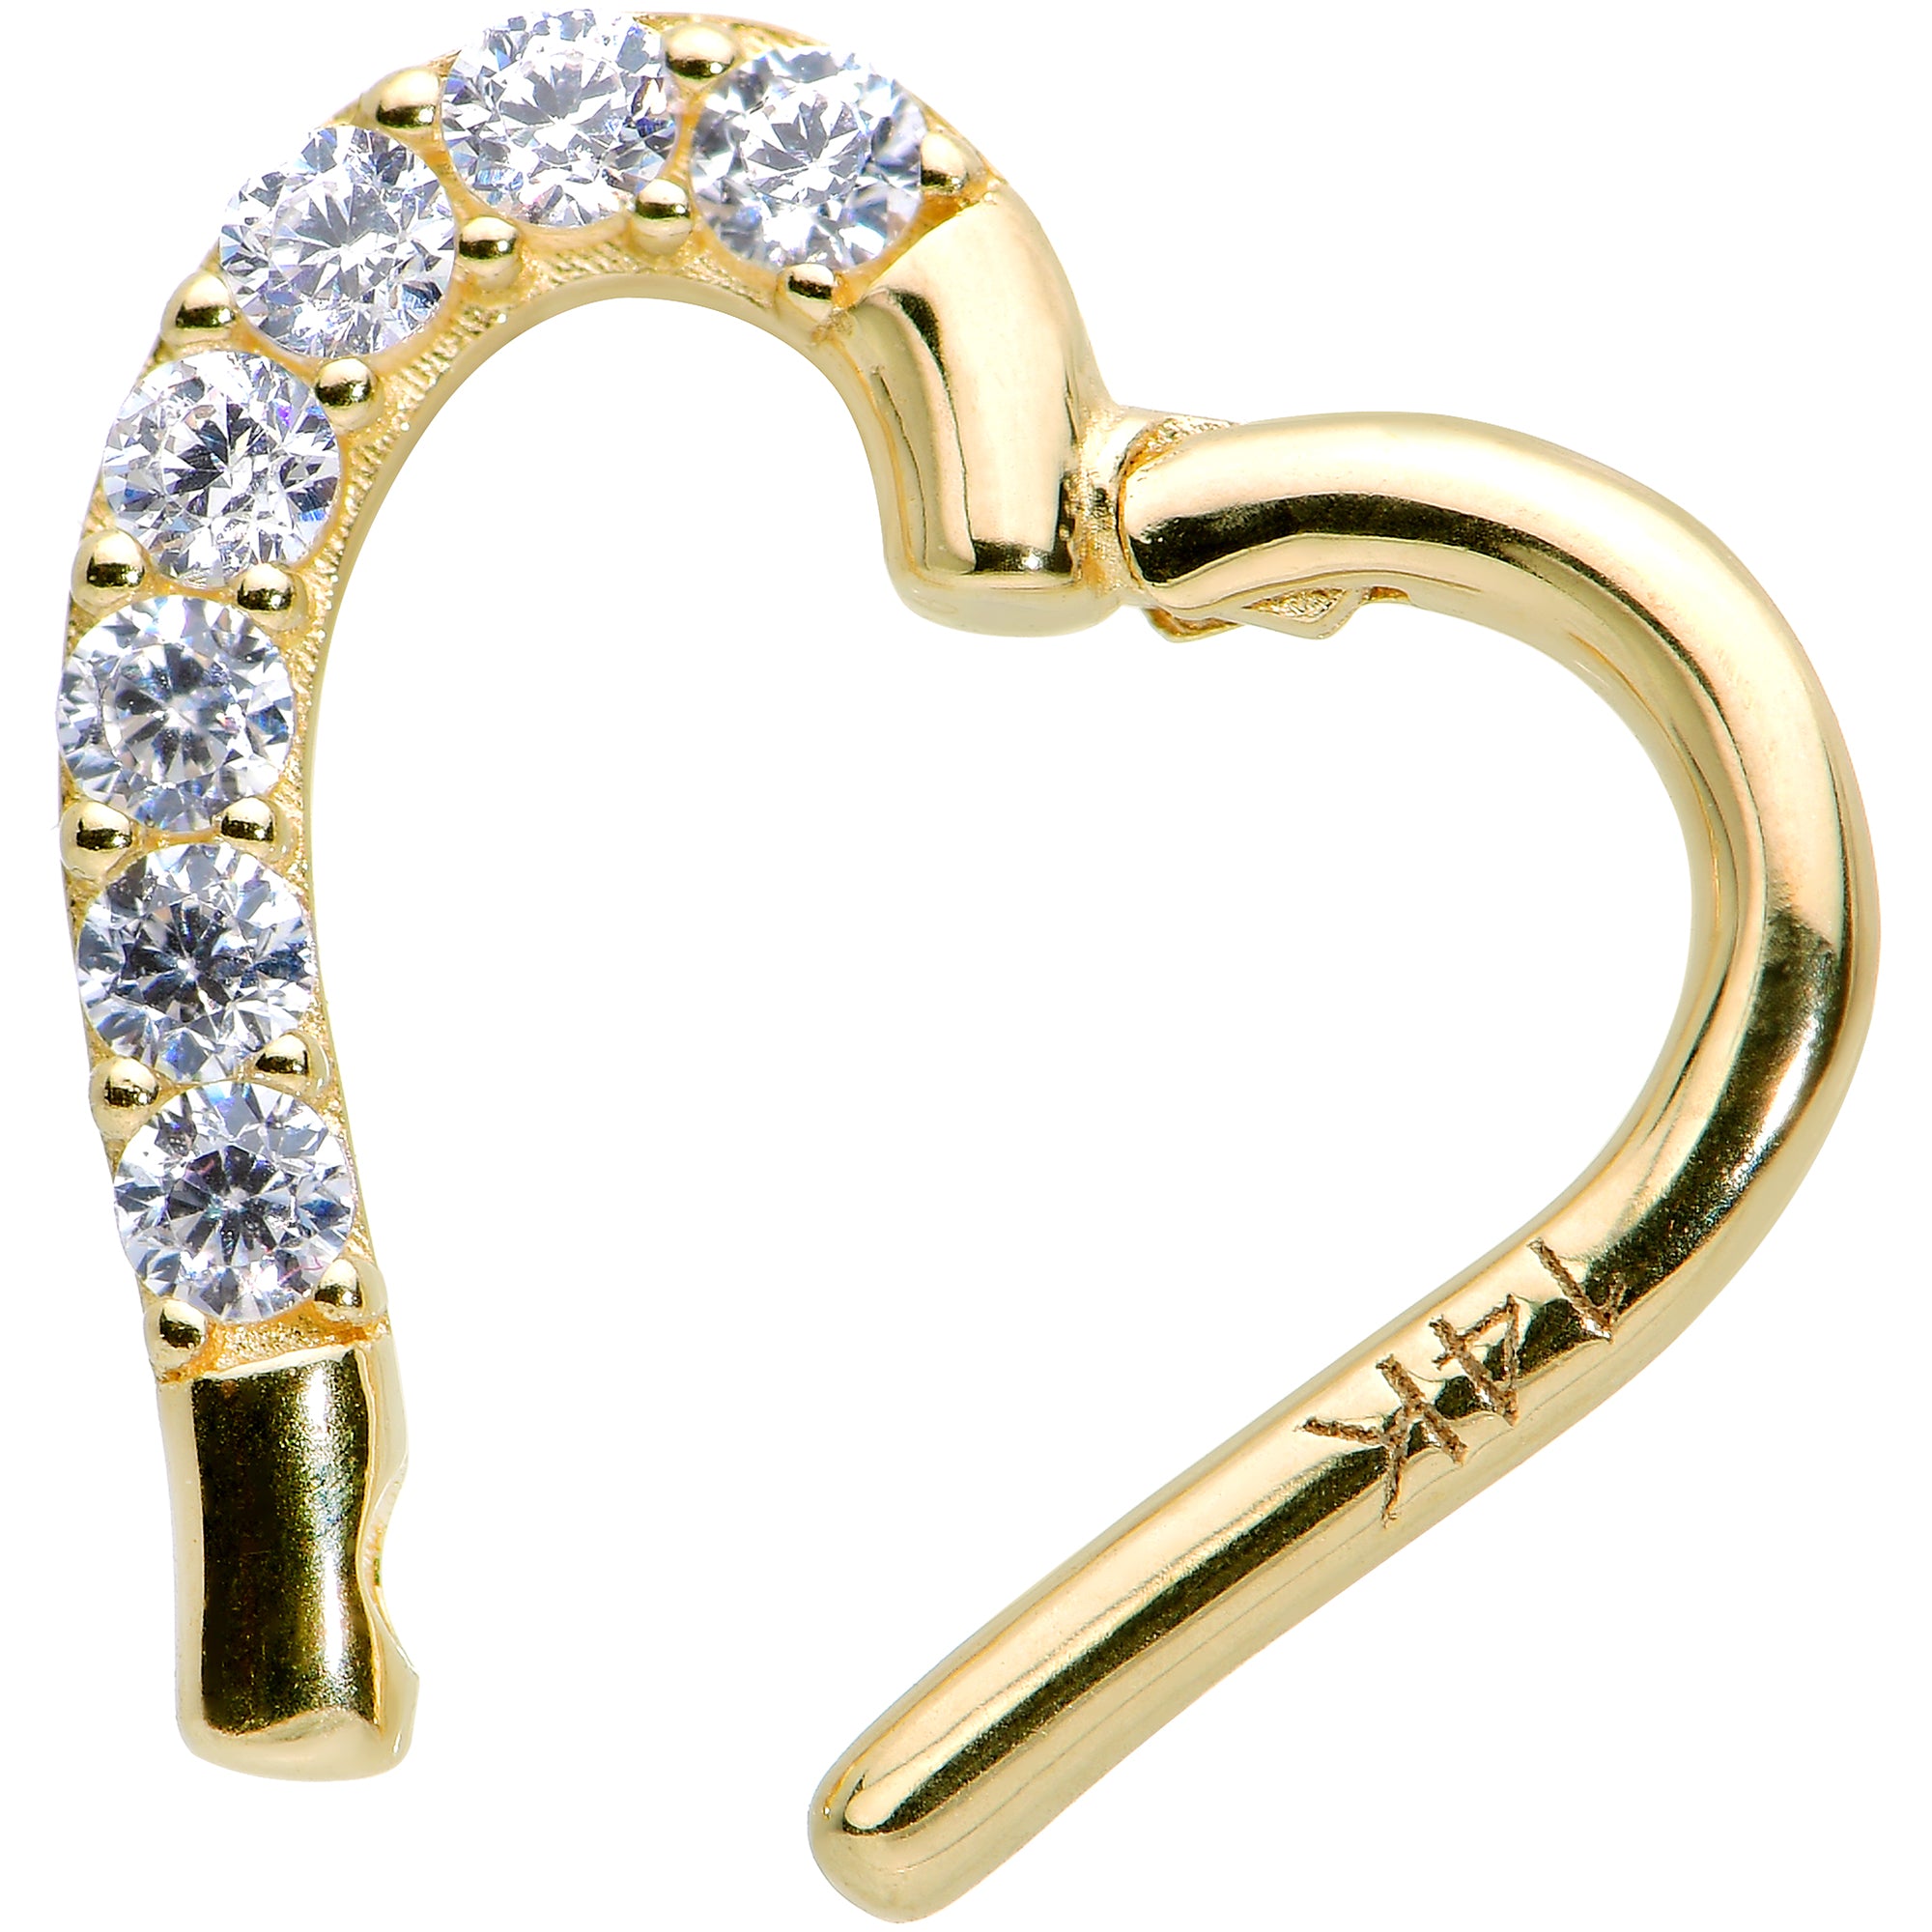 16 Gauge 5/16 14k Yellow Gold CZ Paved Ultra Luxe Right Hinged Heart Segment Ring